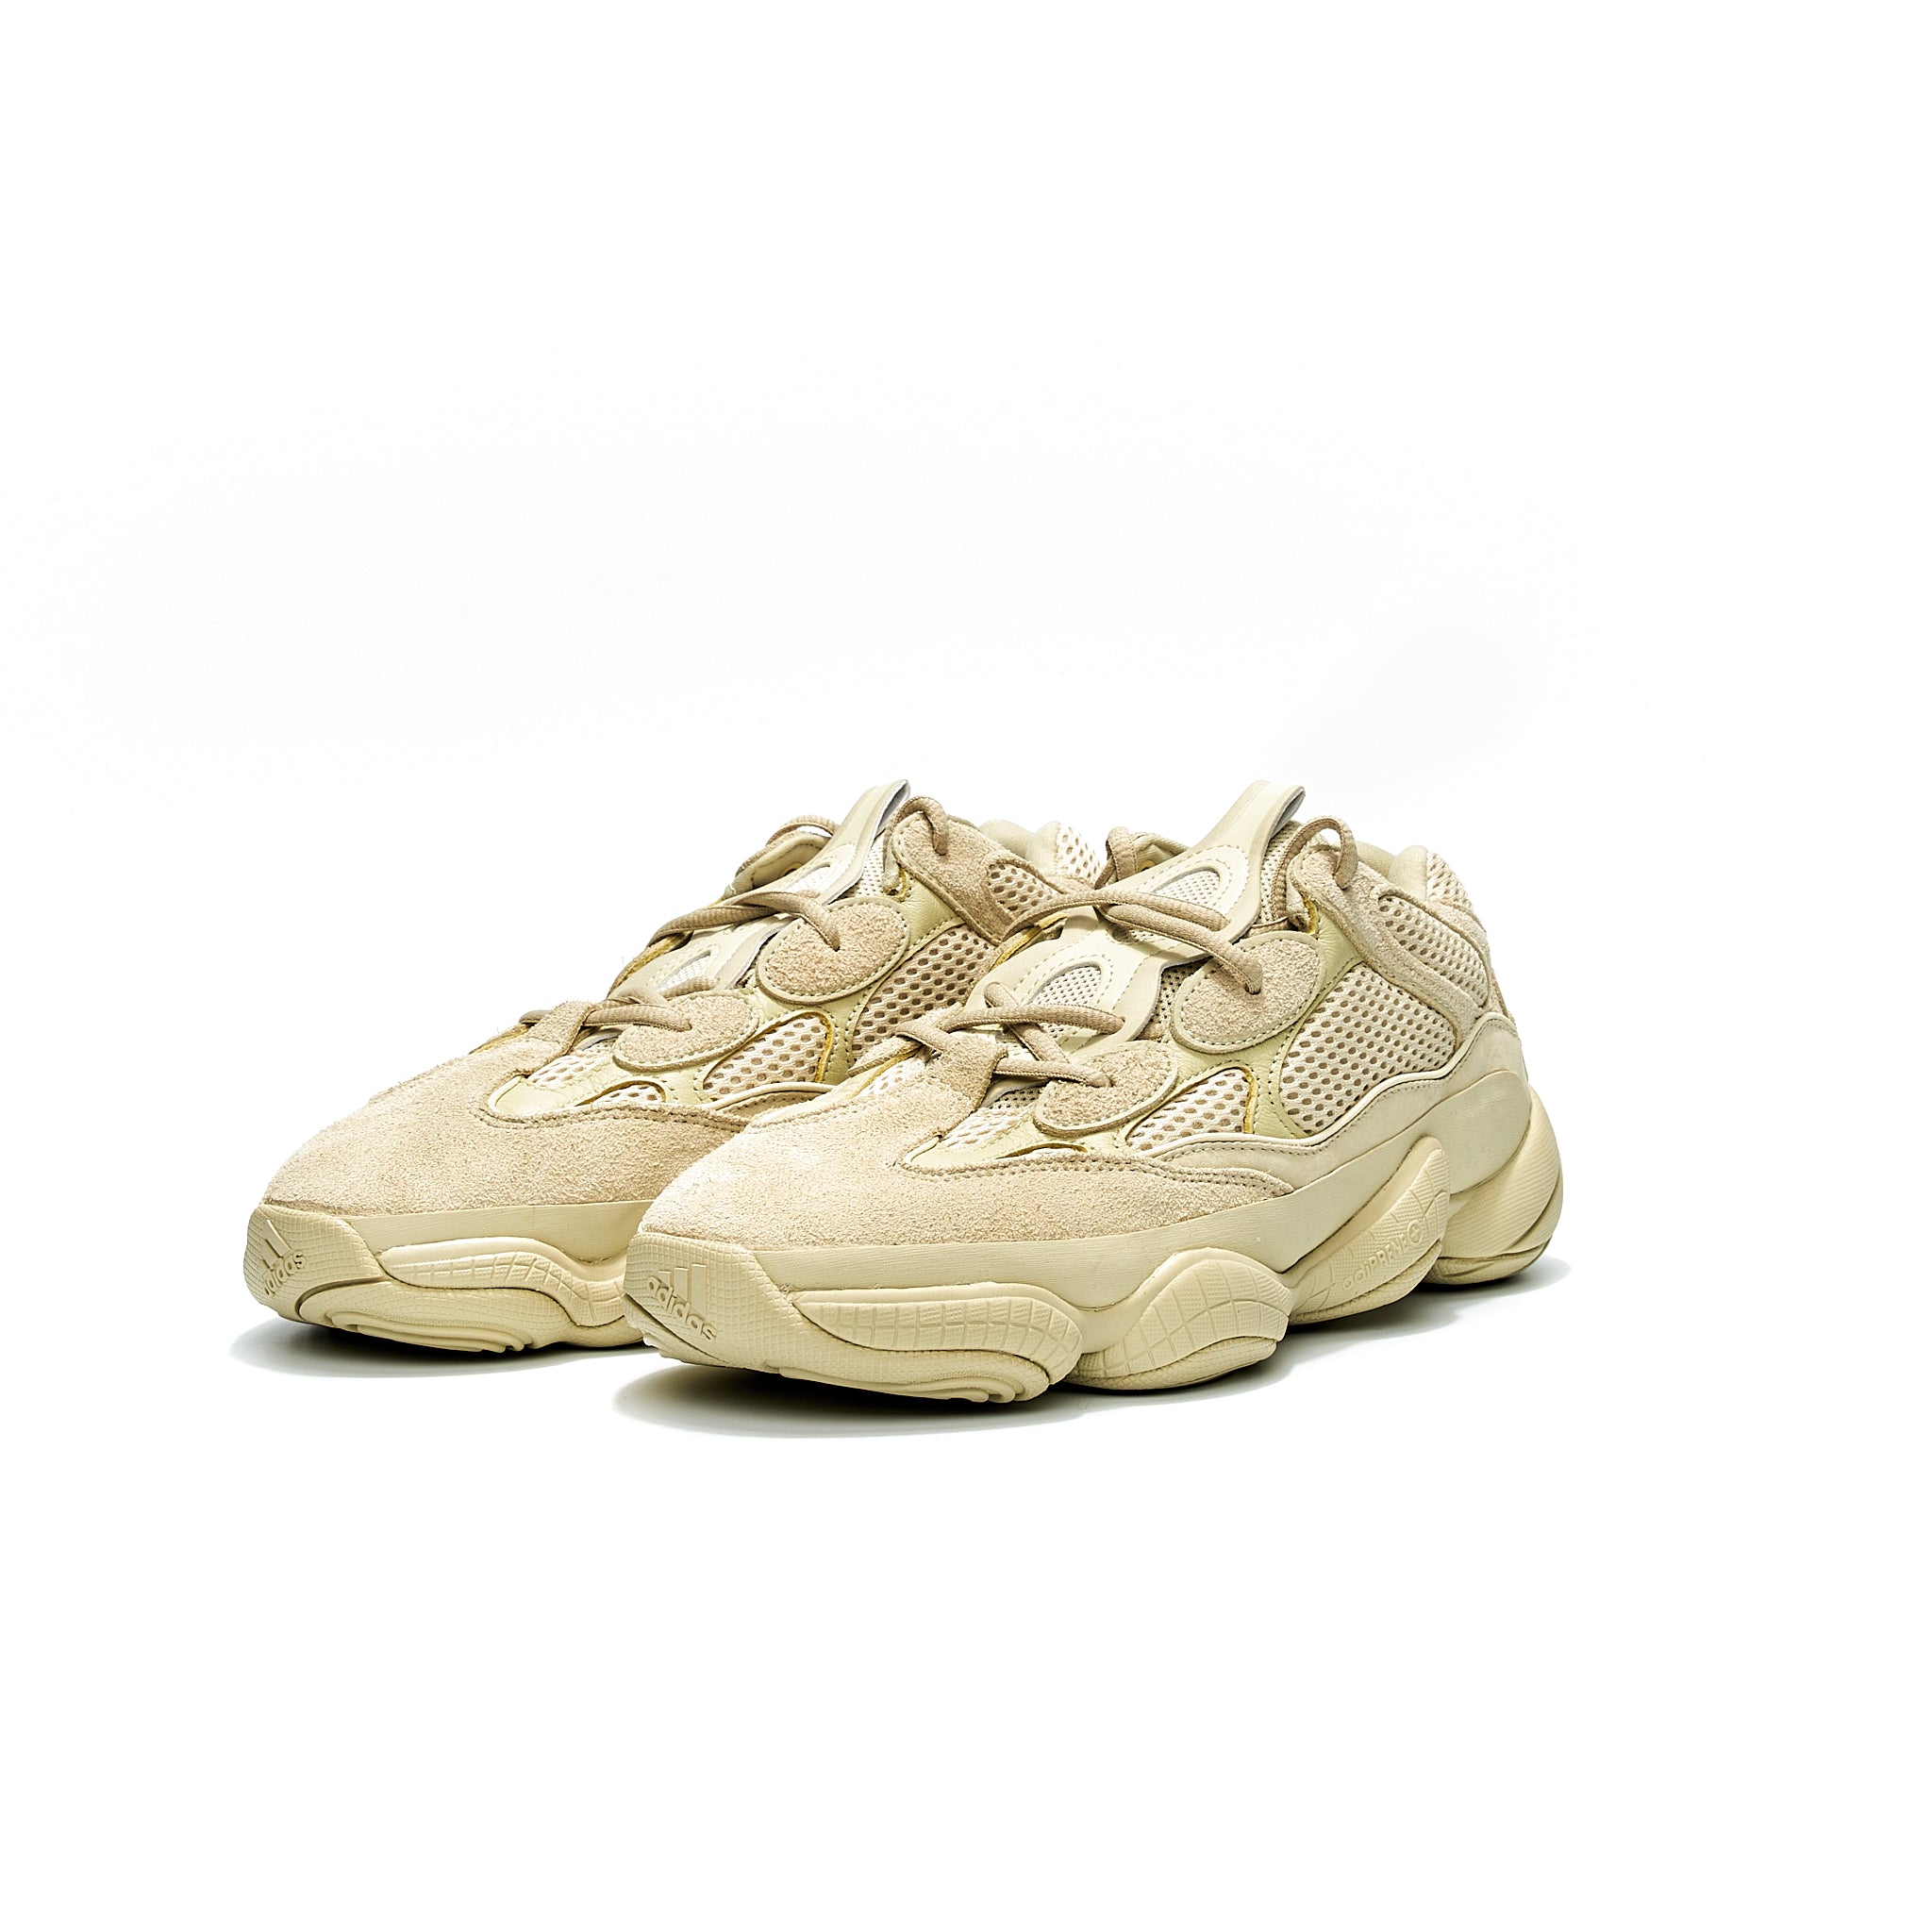 adidas Yeezy 500 Super Moon Yellow – Story Cape Town